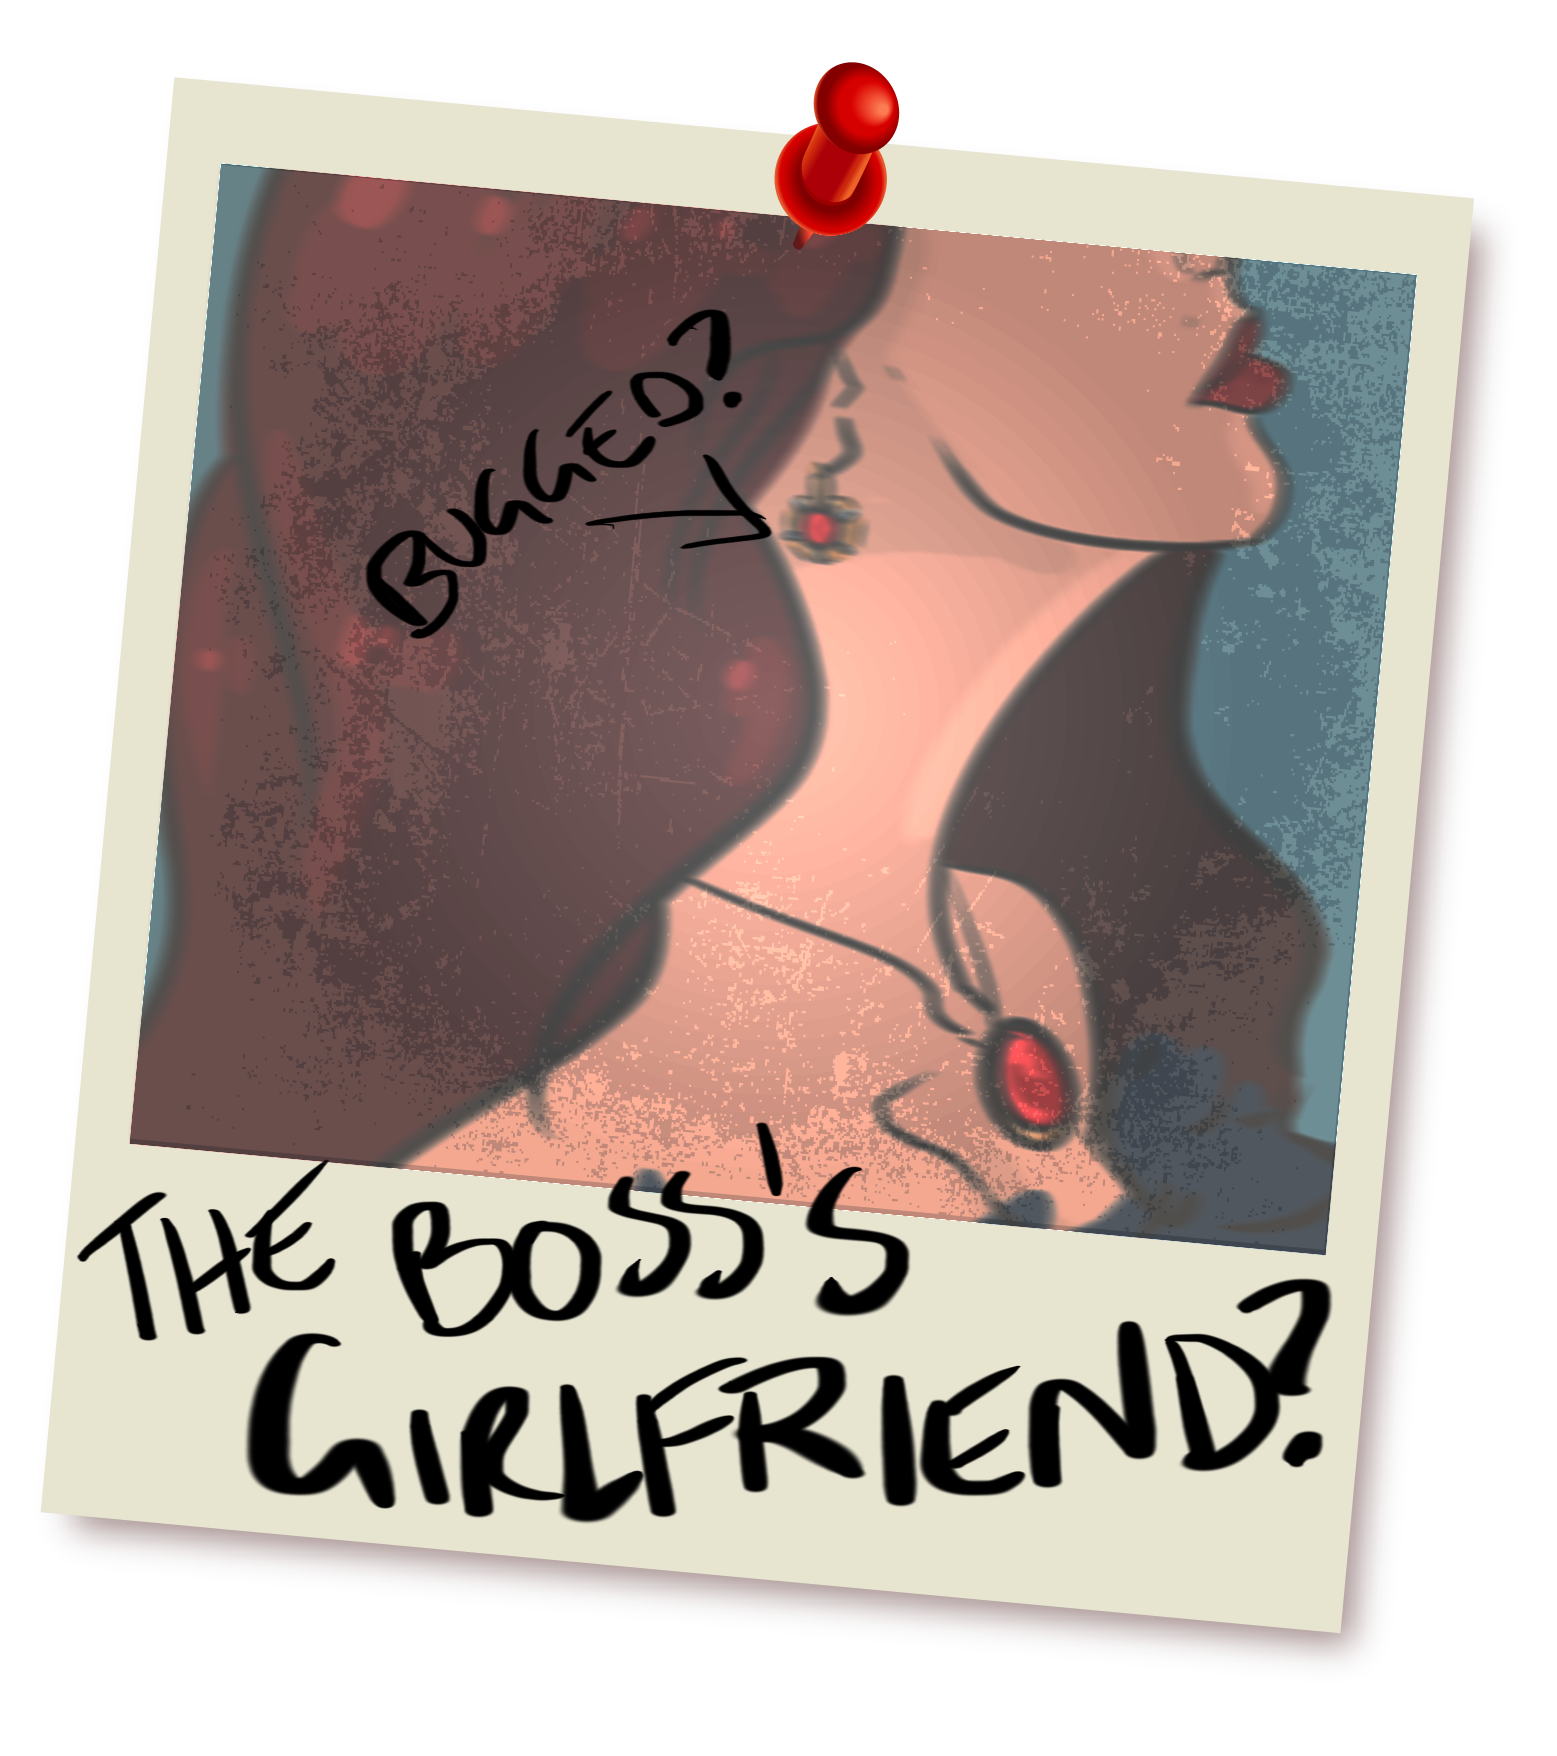 Illustration in the style of a Polaroid photo pinned to a wall. It shows a glamourous-looking woman wearing expensive jewellery, poorly framed to the top half of her face is out of shot. 'The boss's girlfriend?' is written on the polaroid in thick marker text, as well as a note pointing to her earring with the text 'bugged?'.